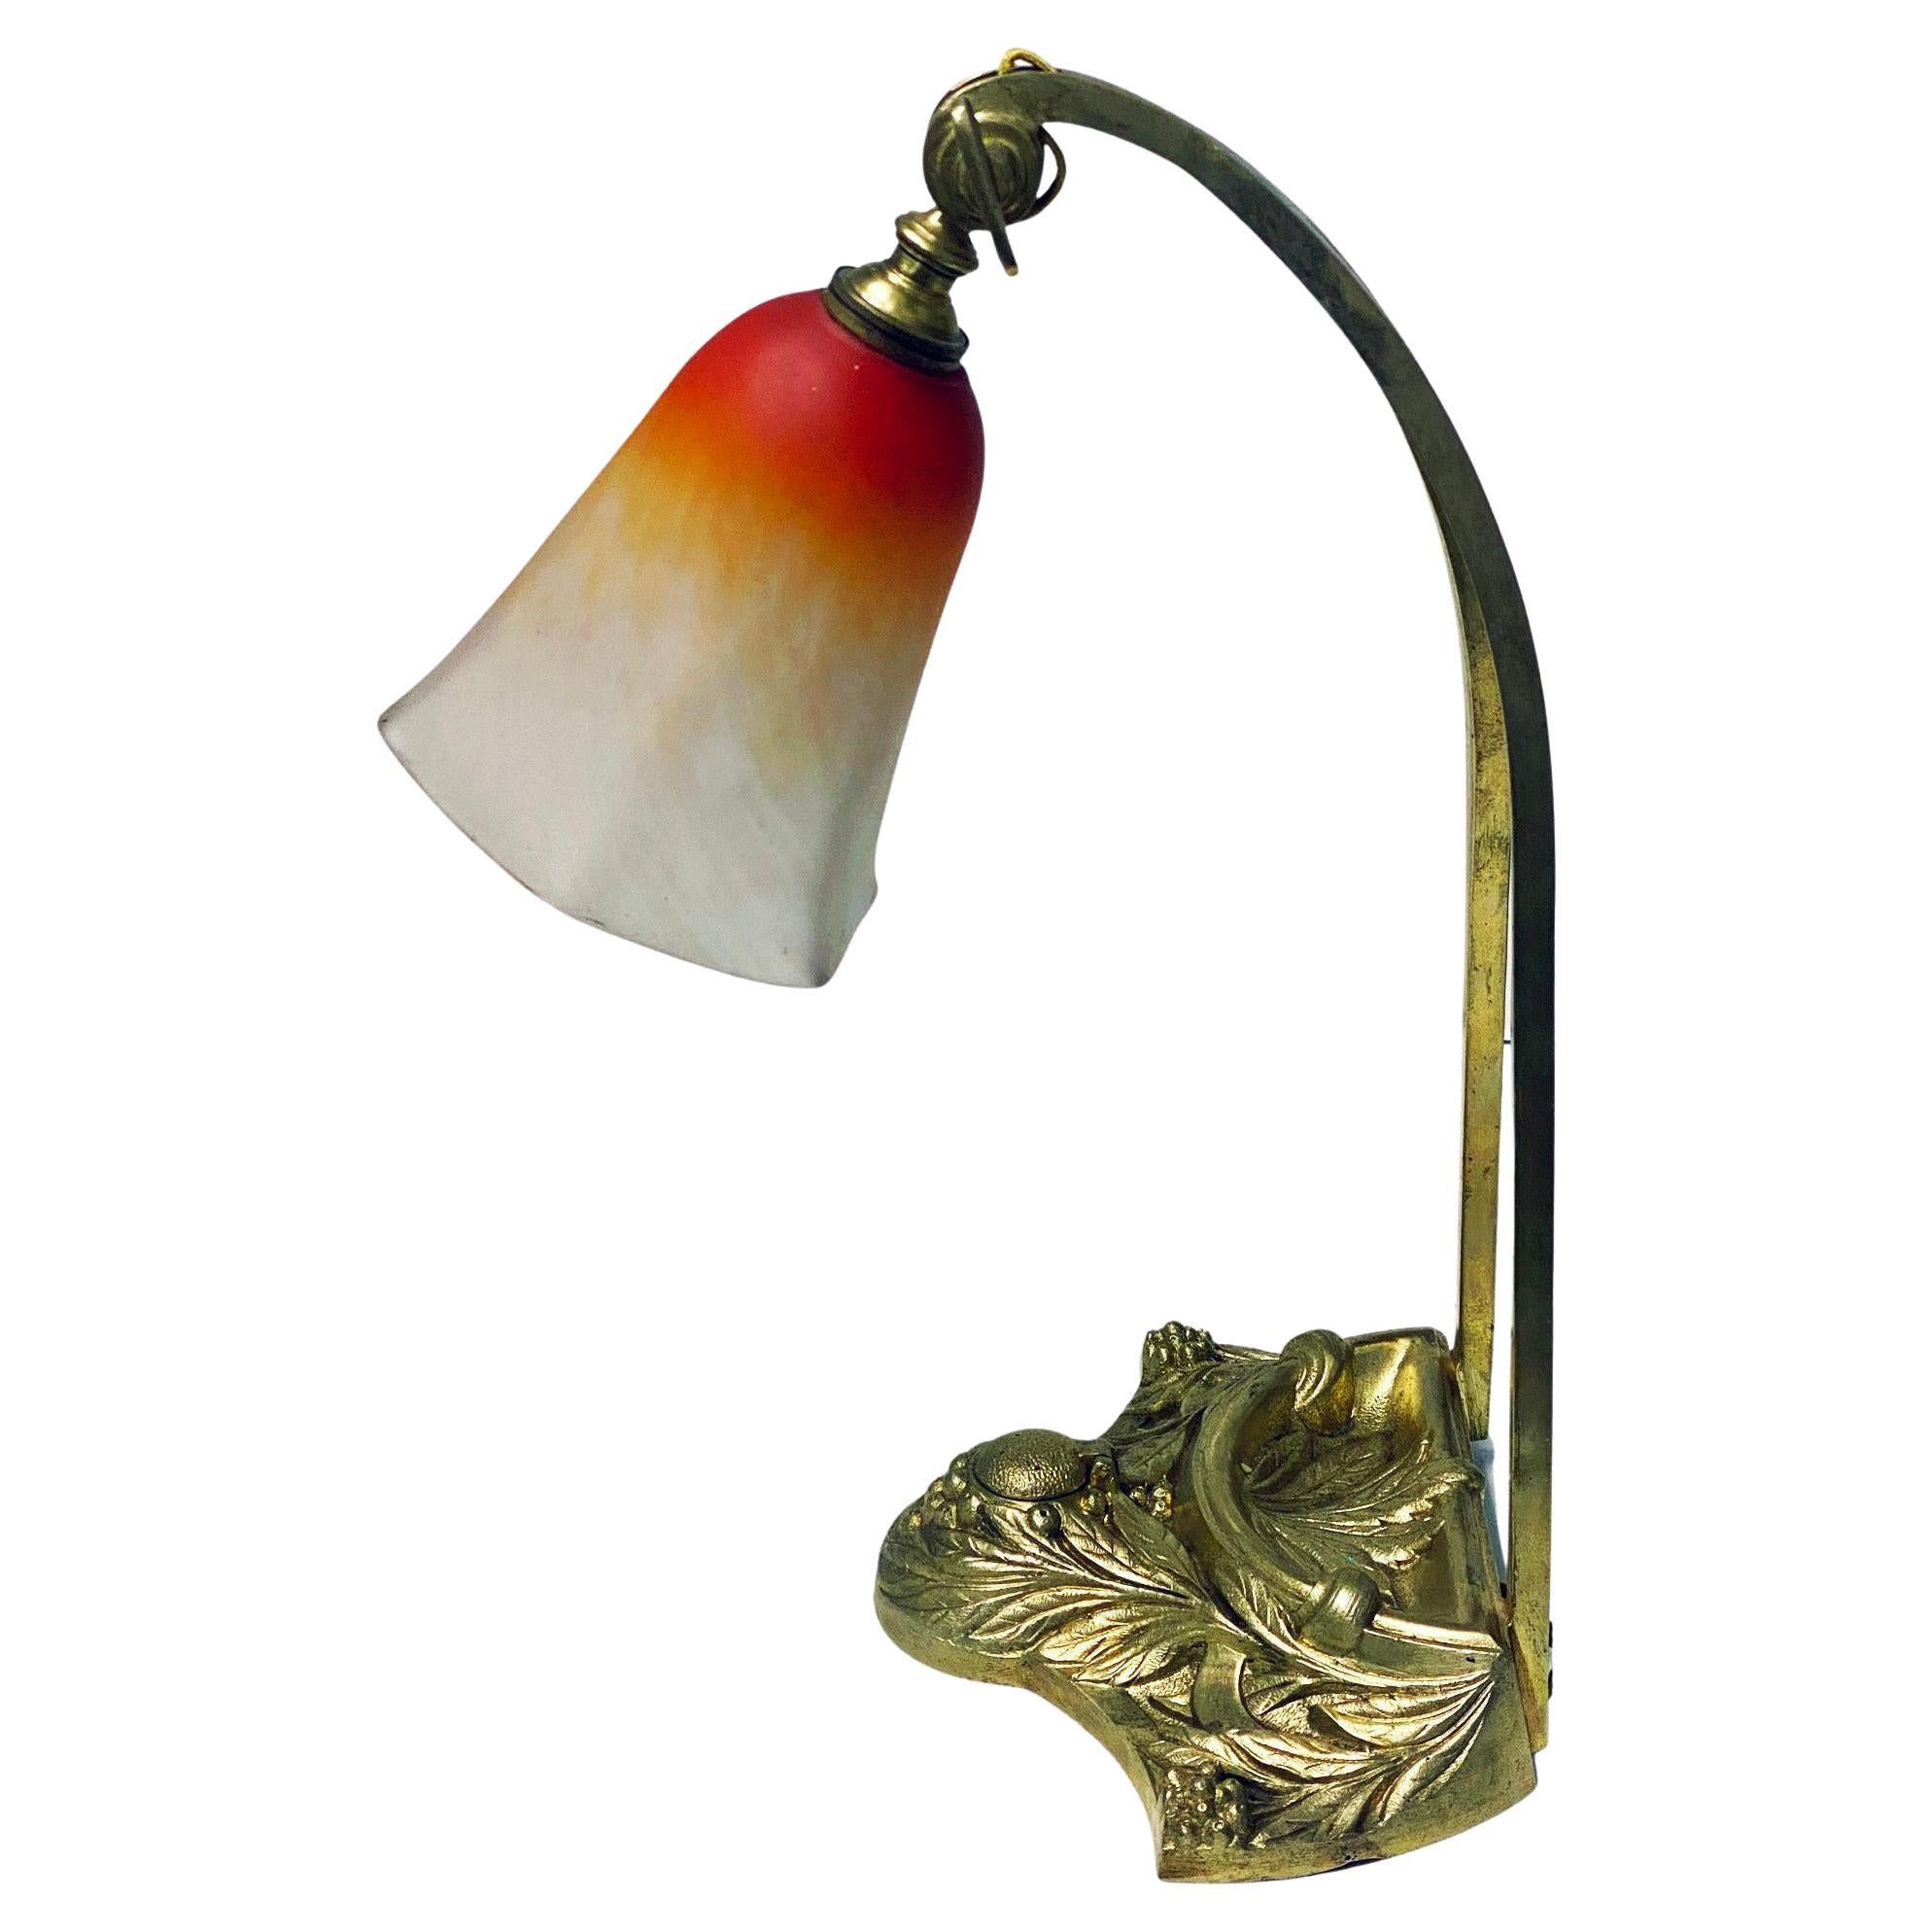 French Art Nouveau Desk Table Lamp by Charles Schneider, C. 1920